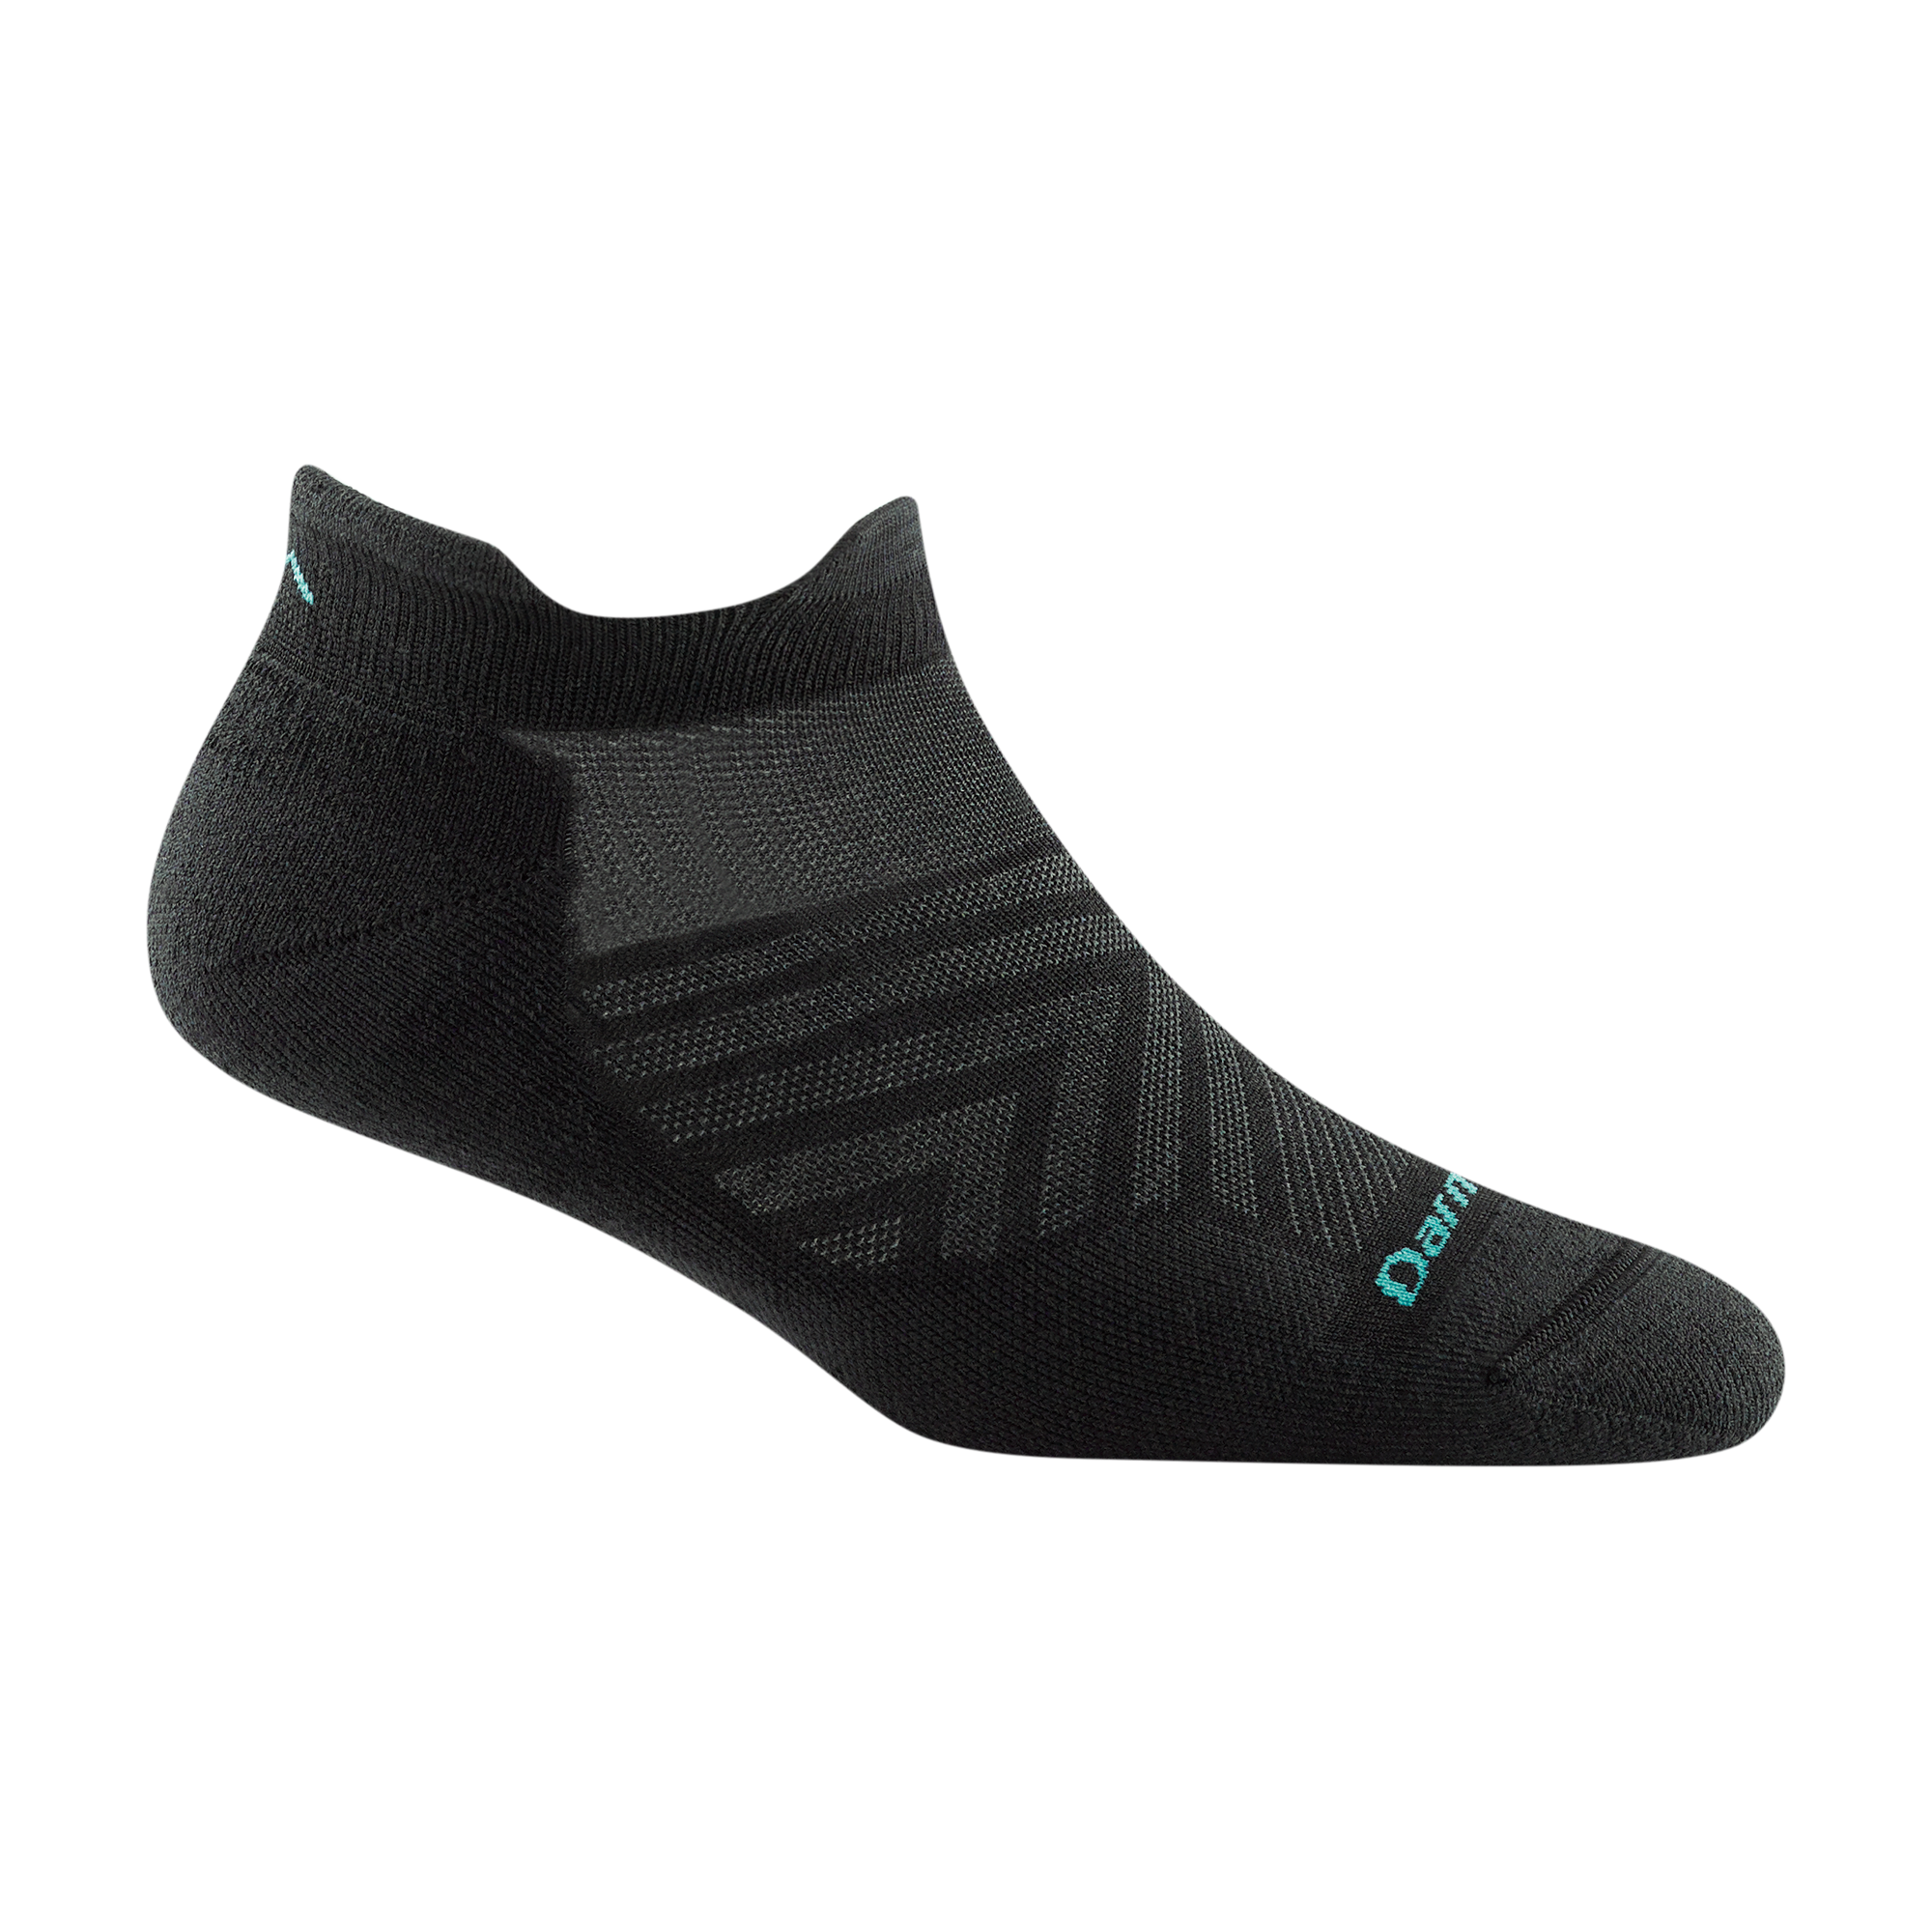 1047 women's no show tab running sock in black with gray chevron forefoot and light blue darn tough signature